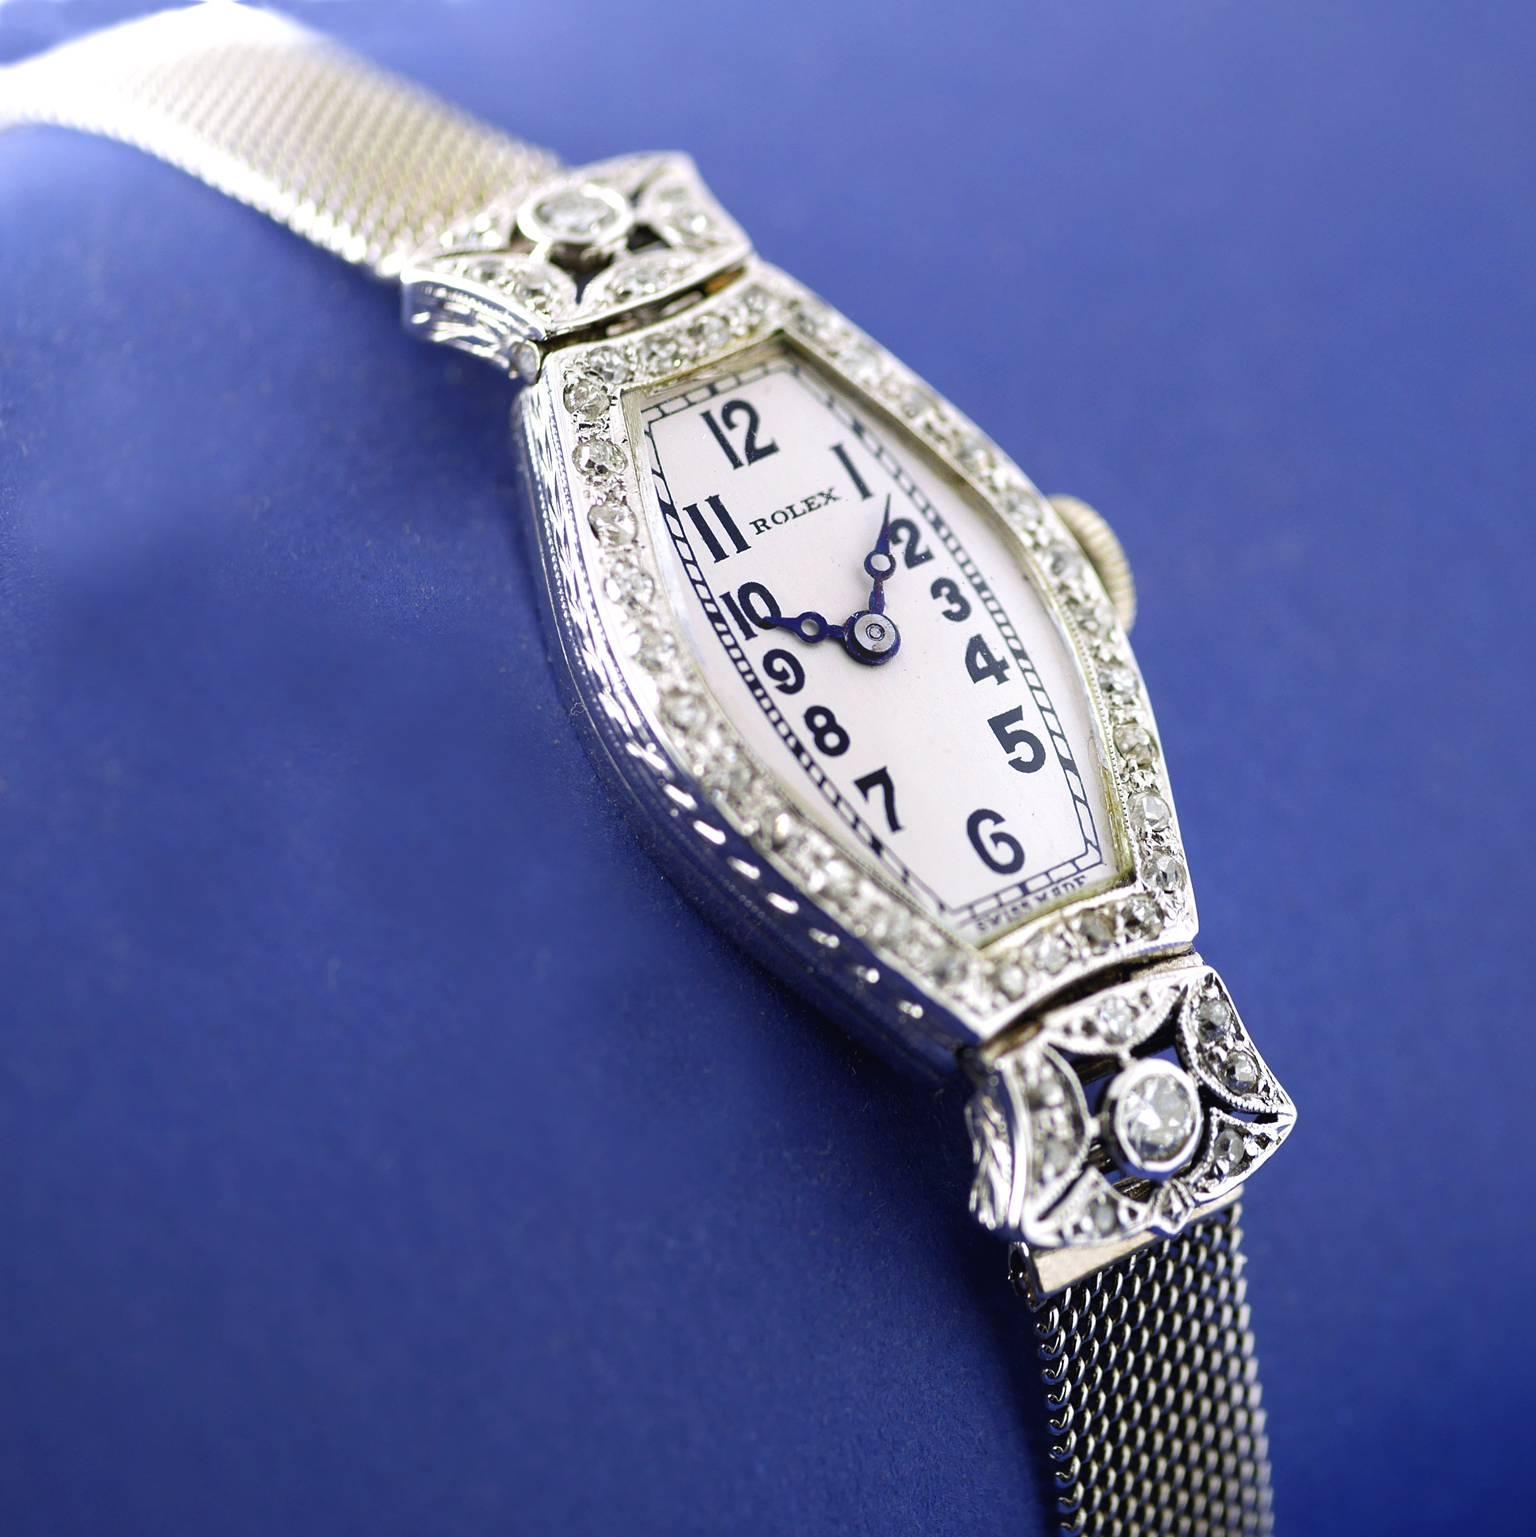 A rare Art Deco diamond wristwatch by Rolex made in 1926 .

The 18 carat white gold case is set with diamonds, chased detail on the sides, marked on the inside case back with “7 World’s Records